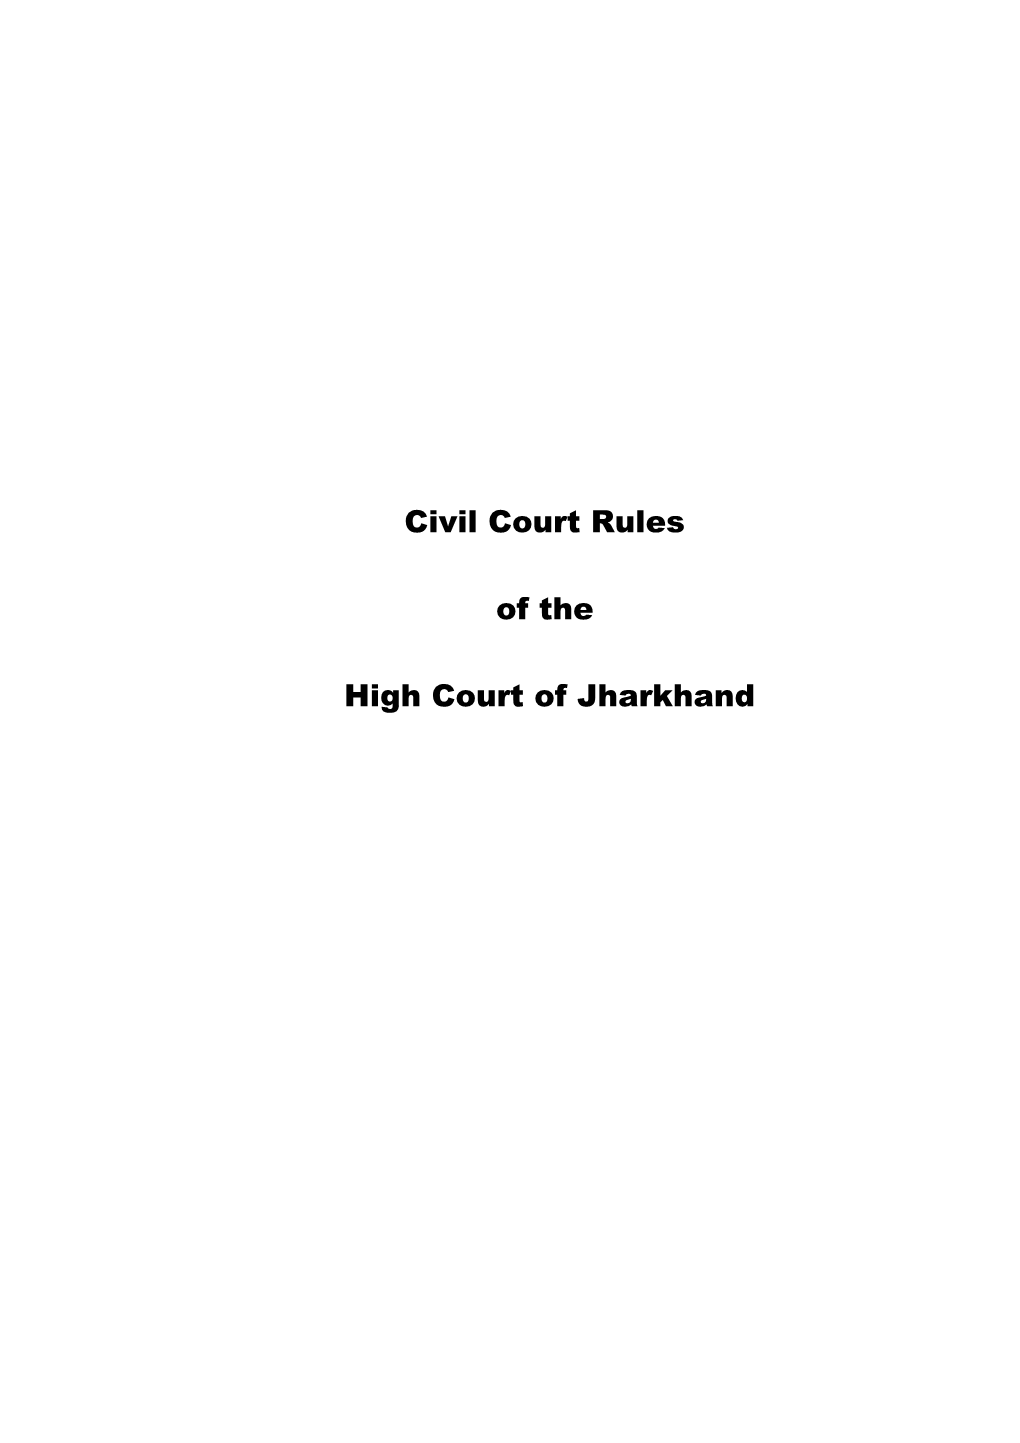 Civil Court Rules of the High Court of Jharkhand